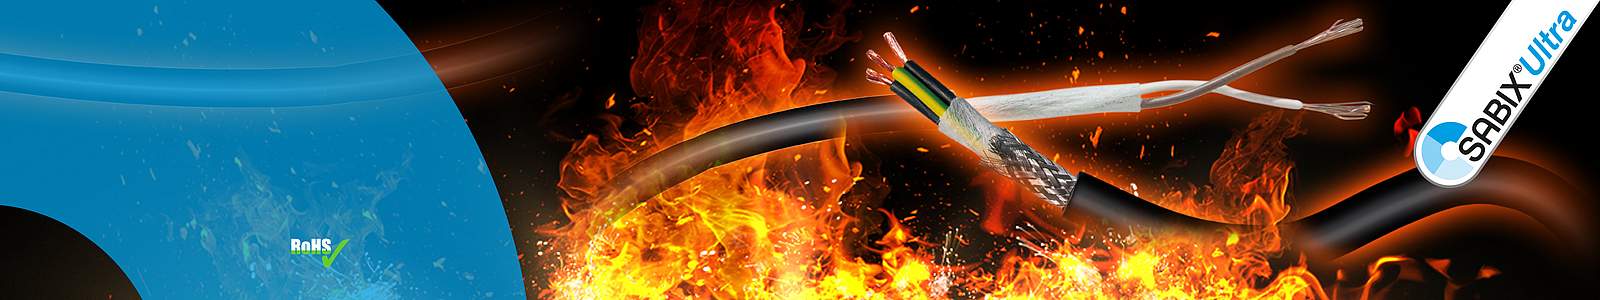 Fire Protection Cables and Wires